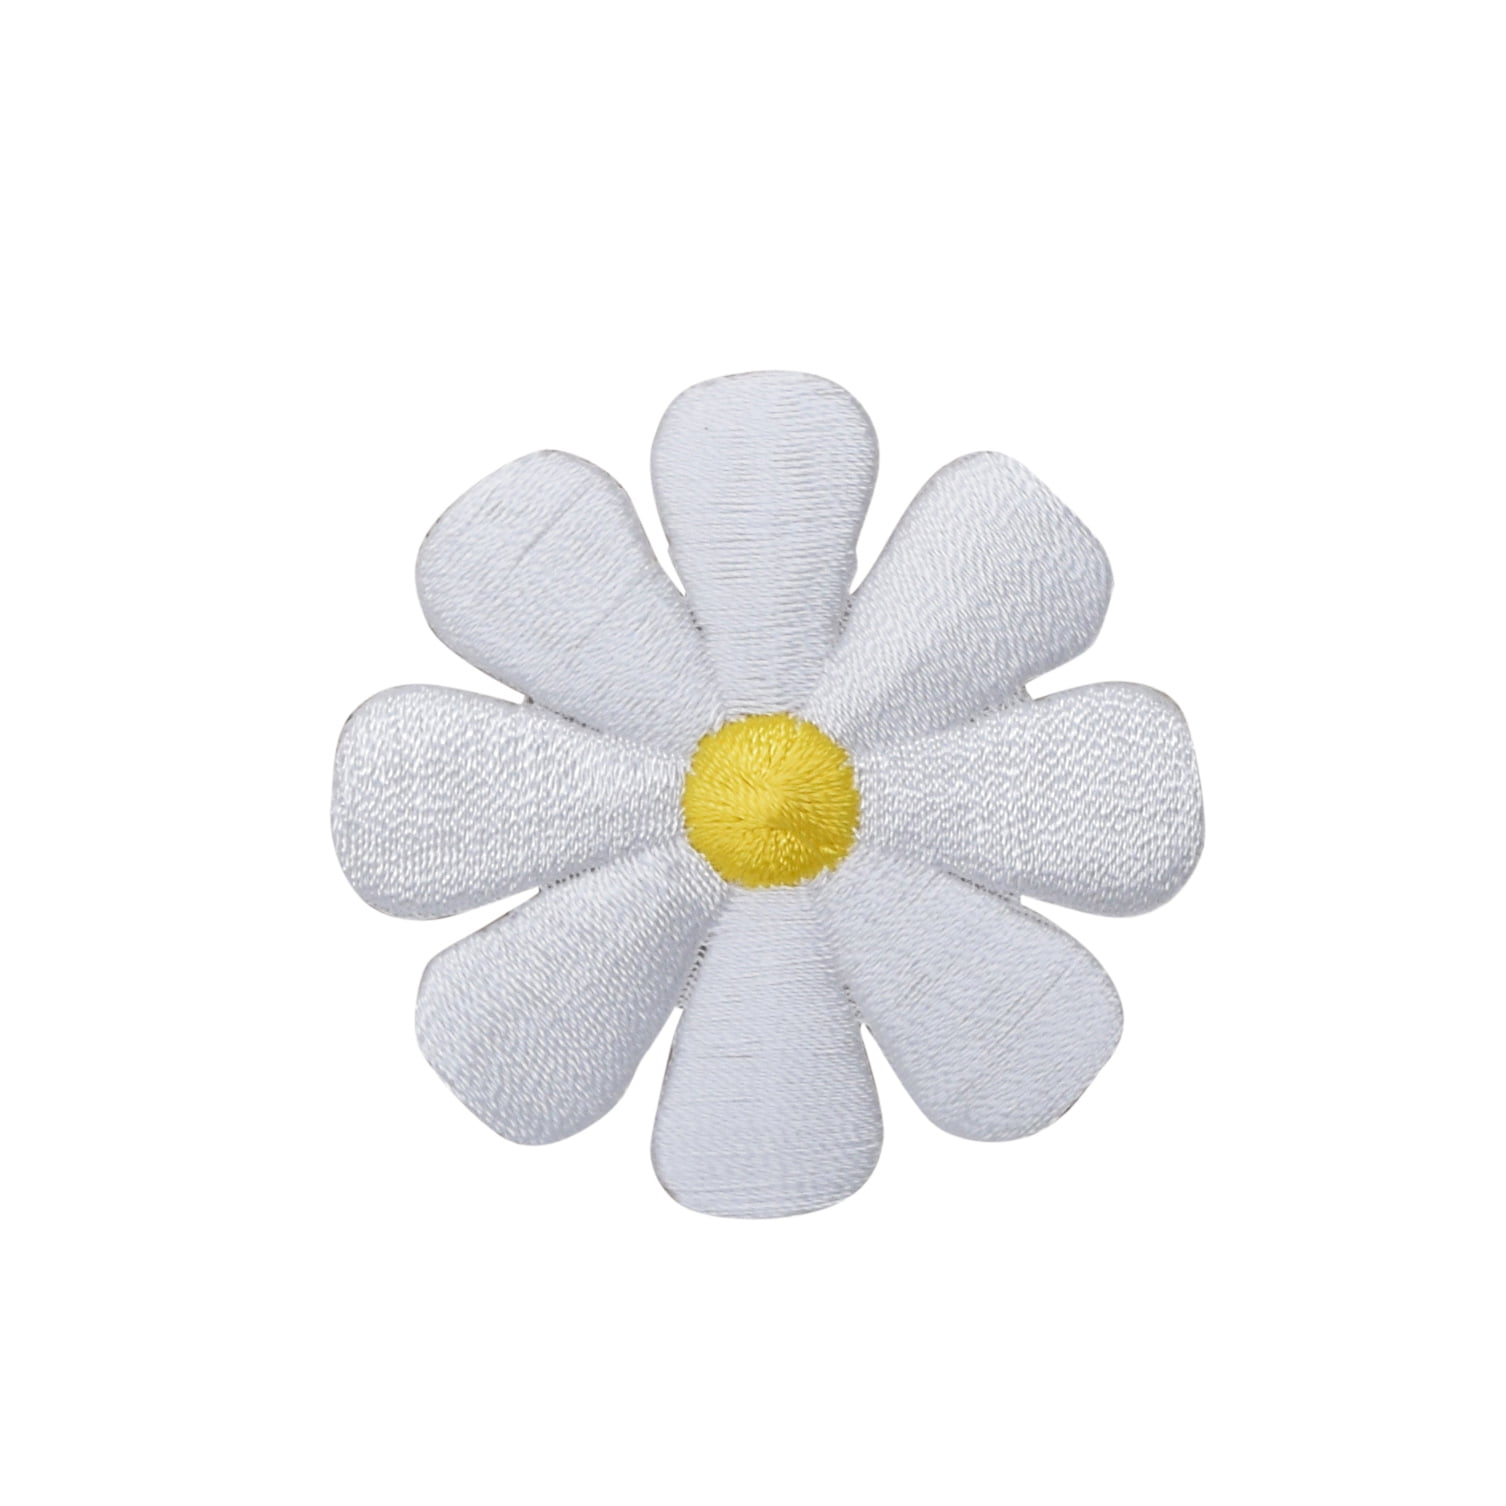 DAISY IRON ON FLOWER PATCH  1 3/4  X 1 3/4  inch